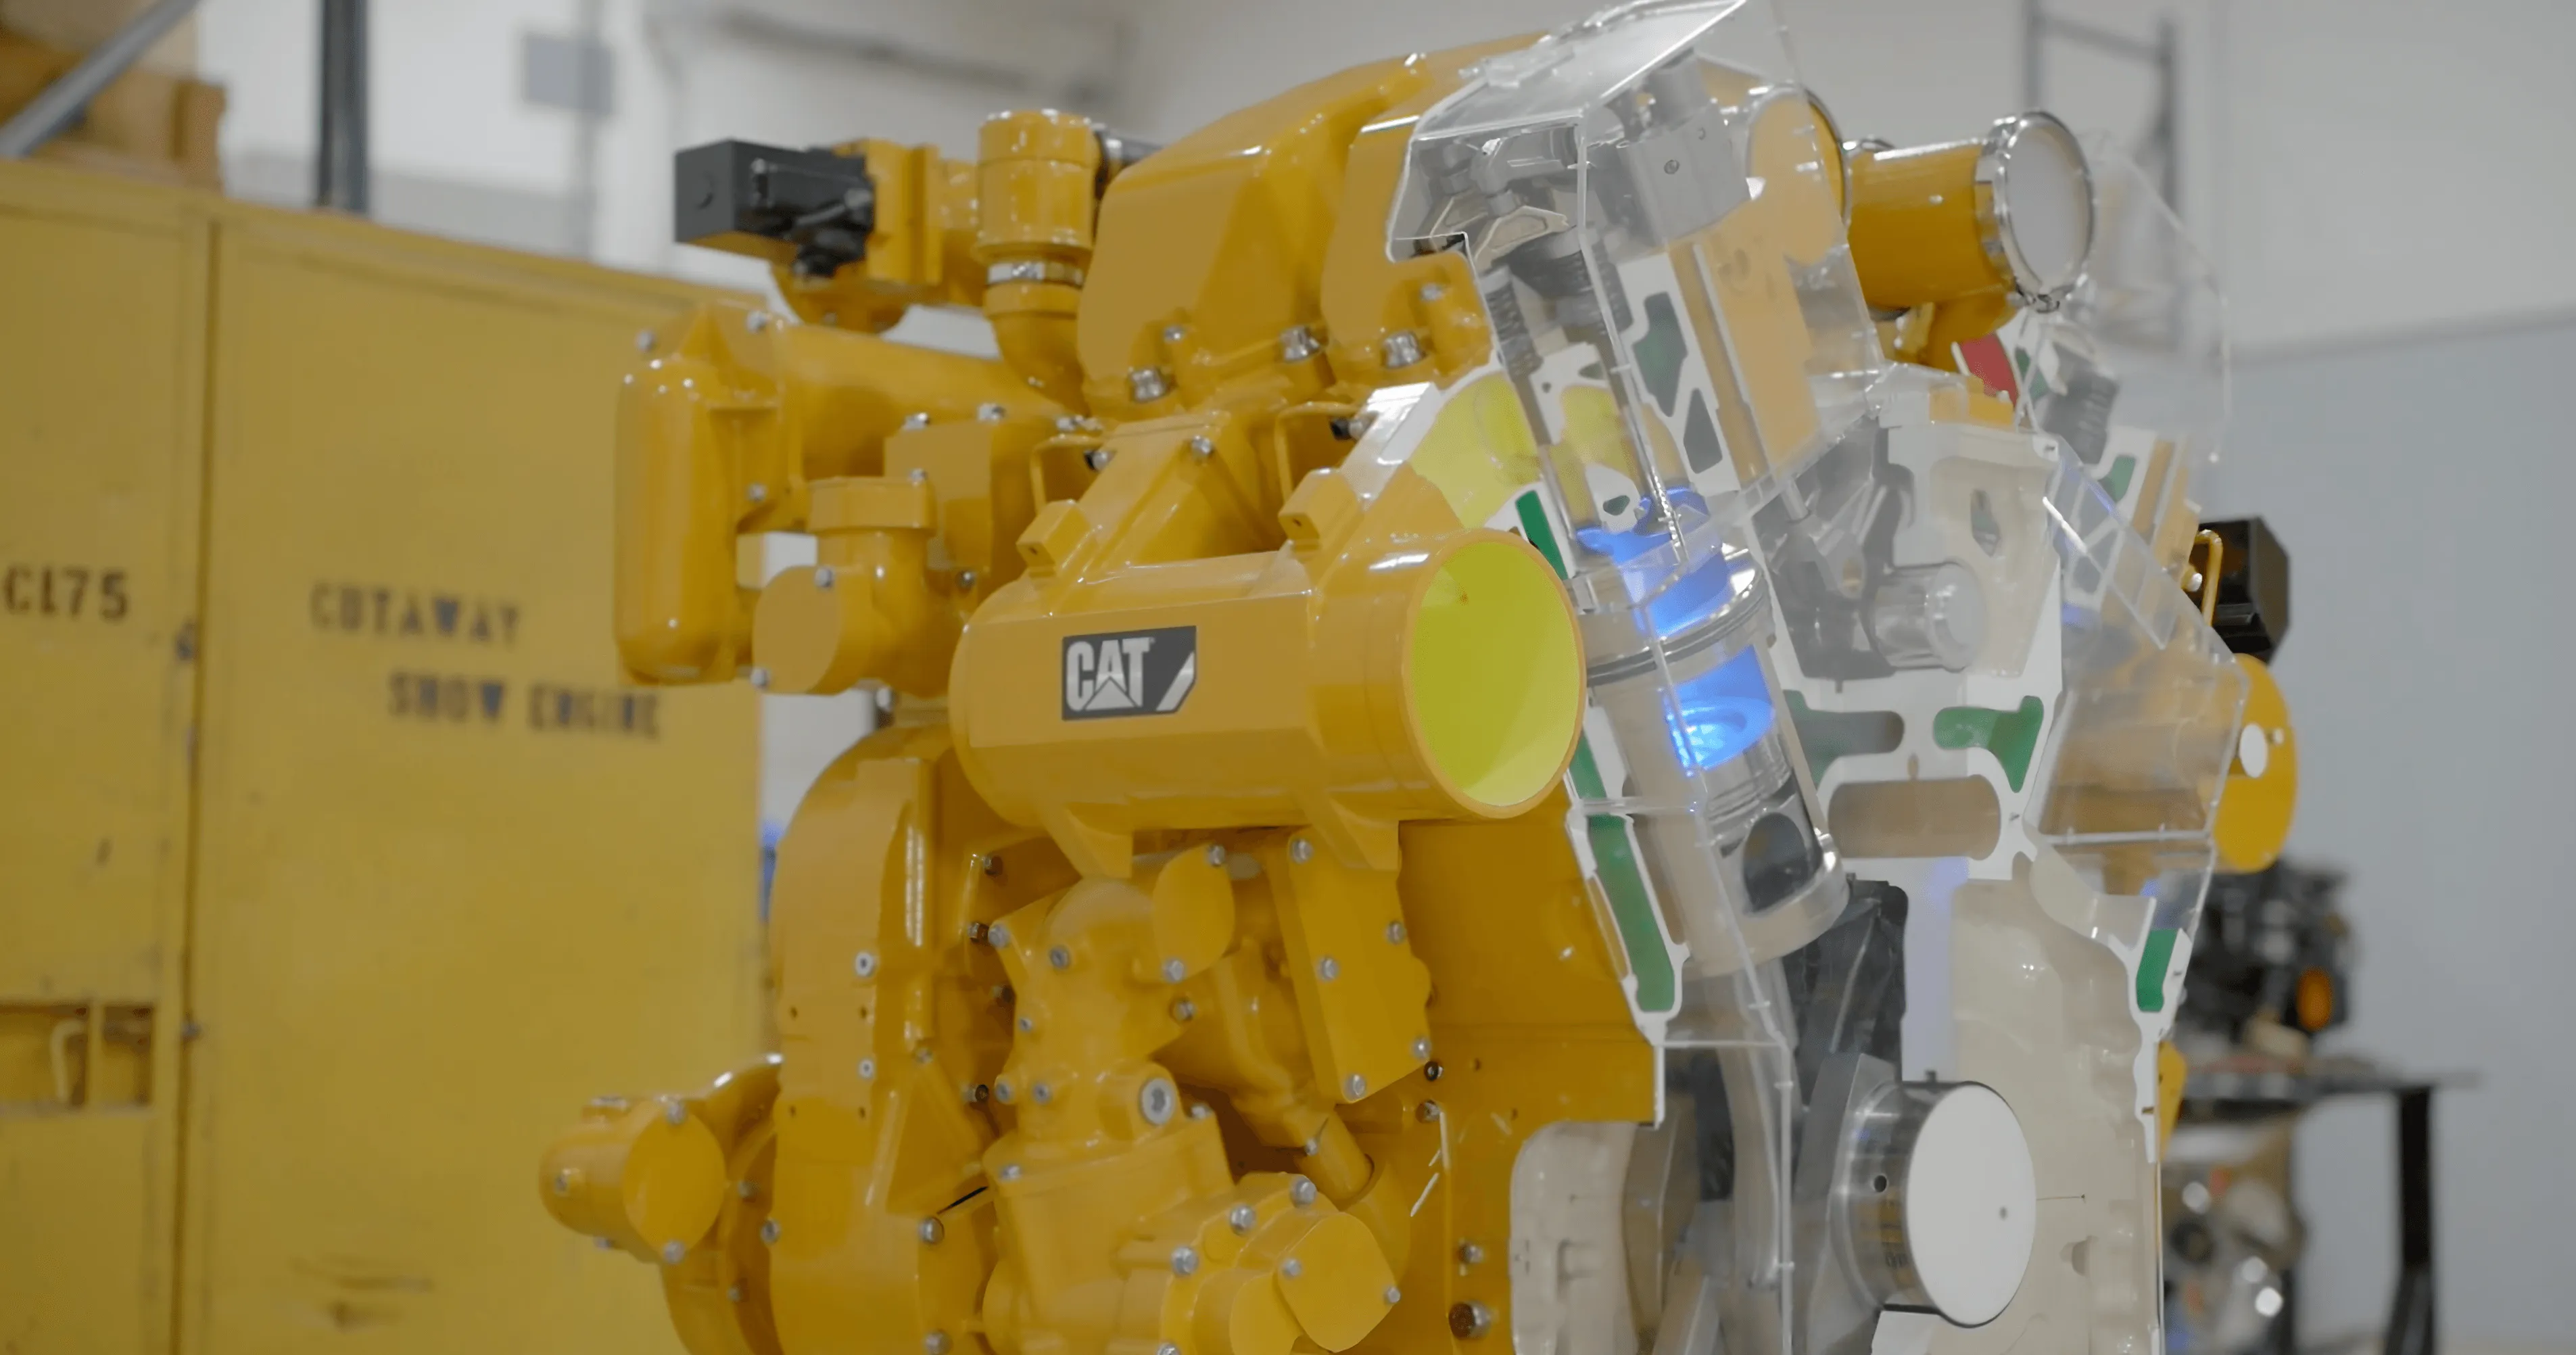 Industrial robot with yellow components and a partially transparent casing on display, with manufacturing equipment in the background.